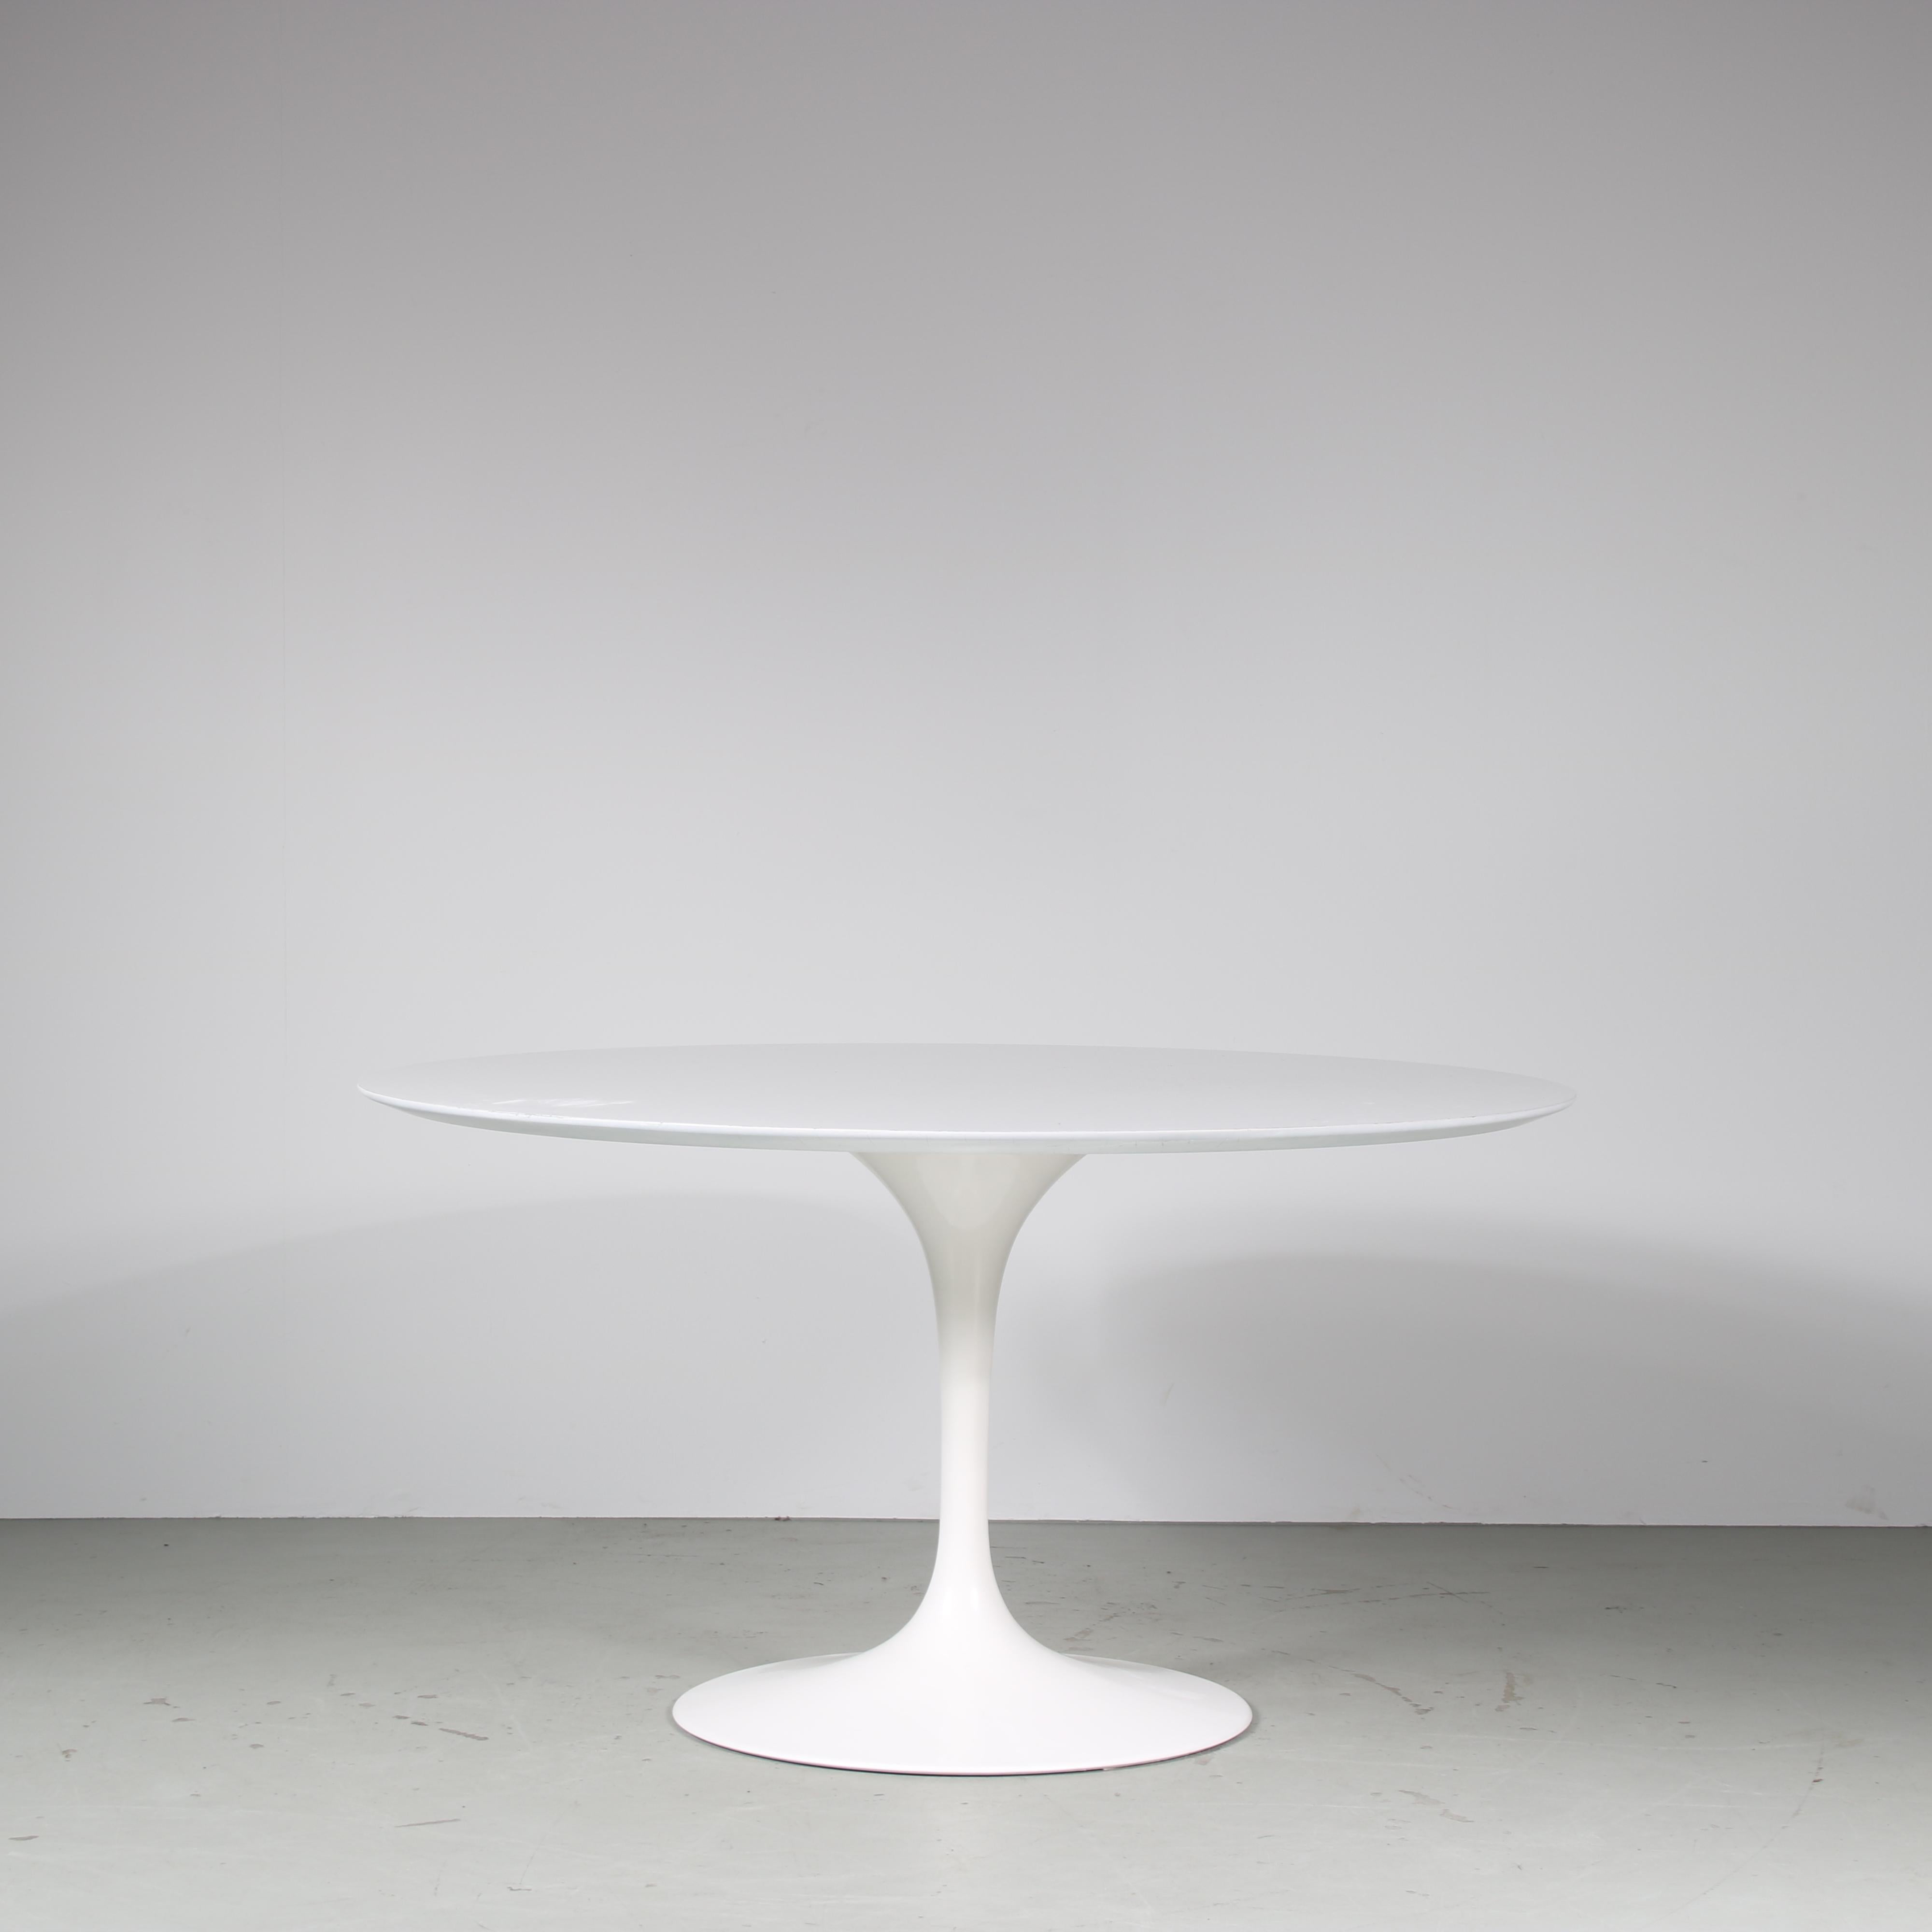 A lovely dining table designed by Eero Saarinen, manufactured by Knoll International in the United States around 1970.

This elegant piece has a most recognizable style! The trumpet shaped base has a high quality, white coated aluminum base. It